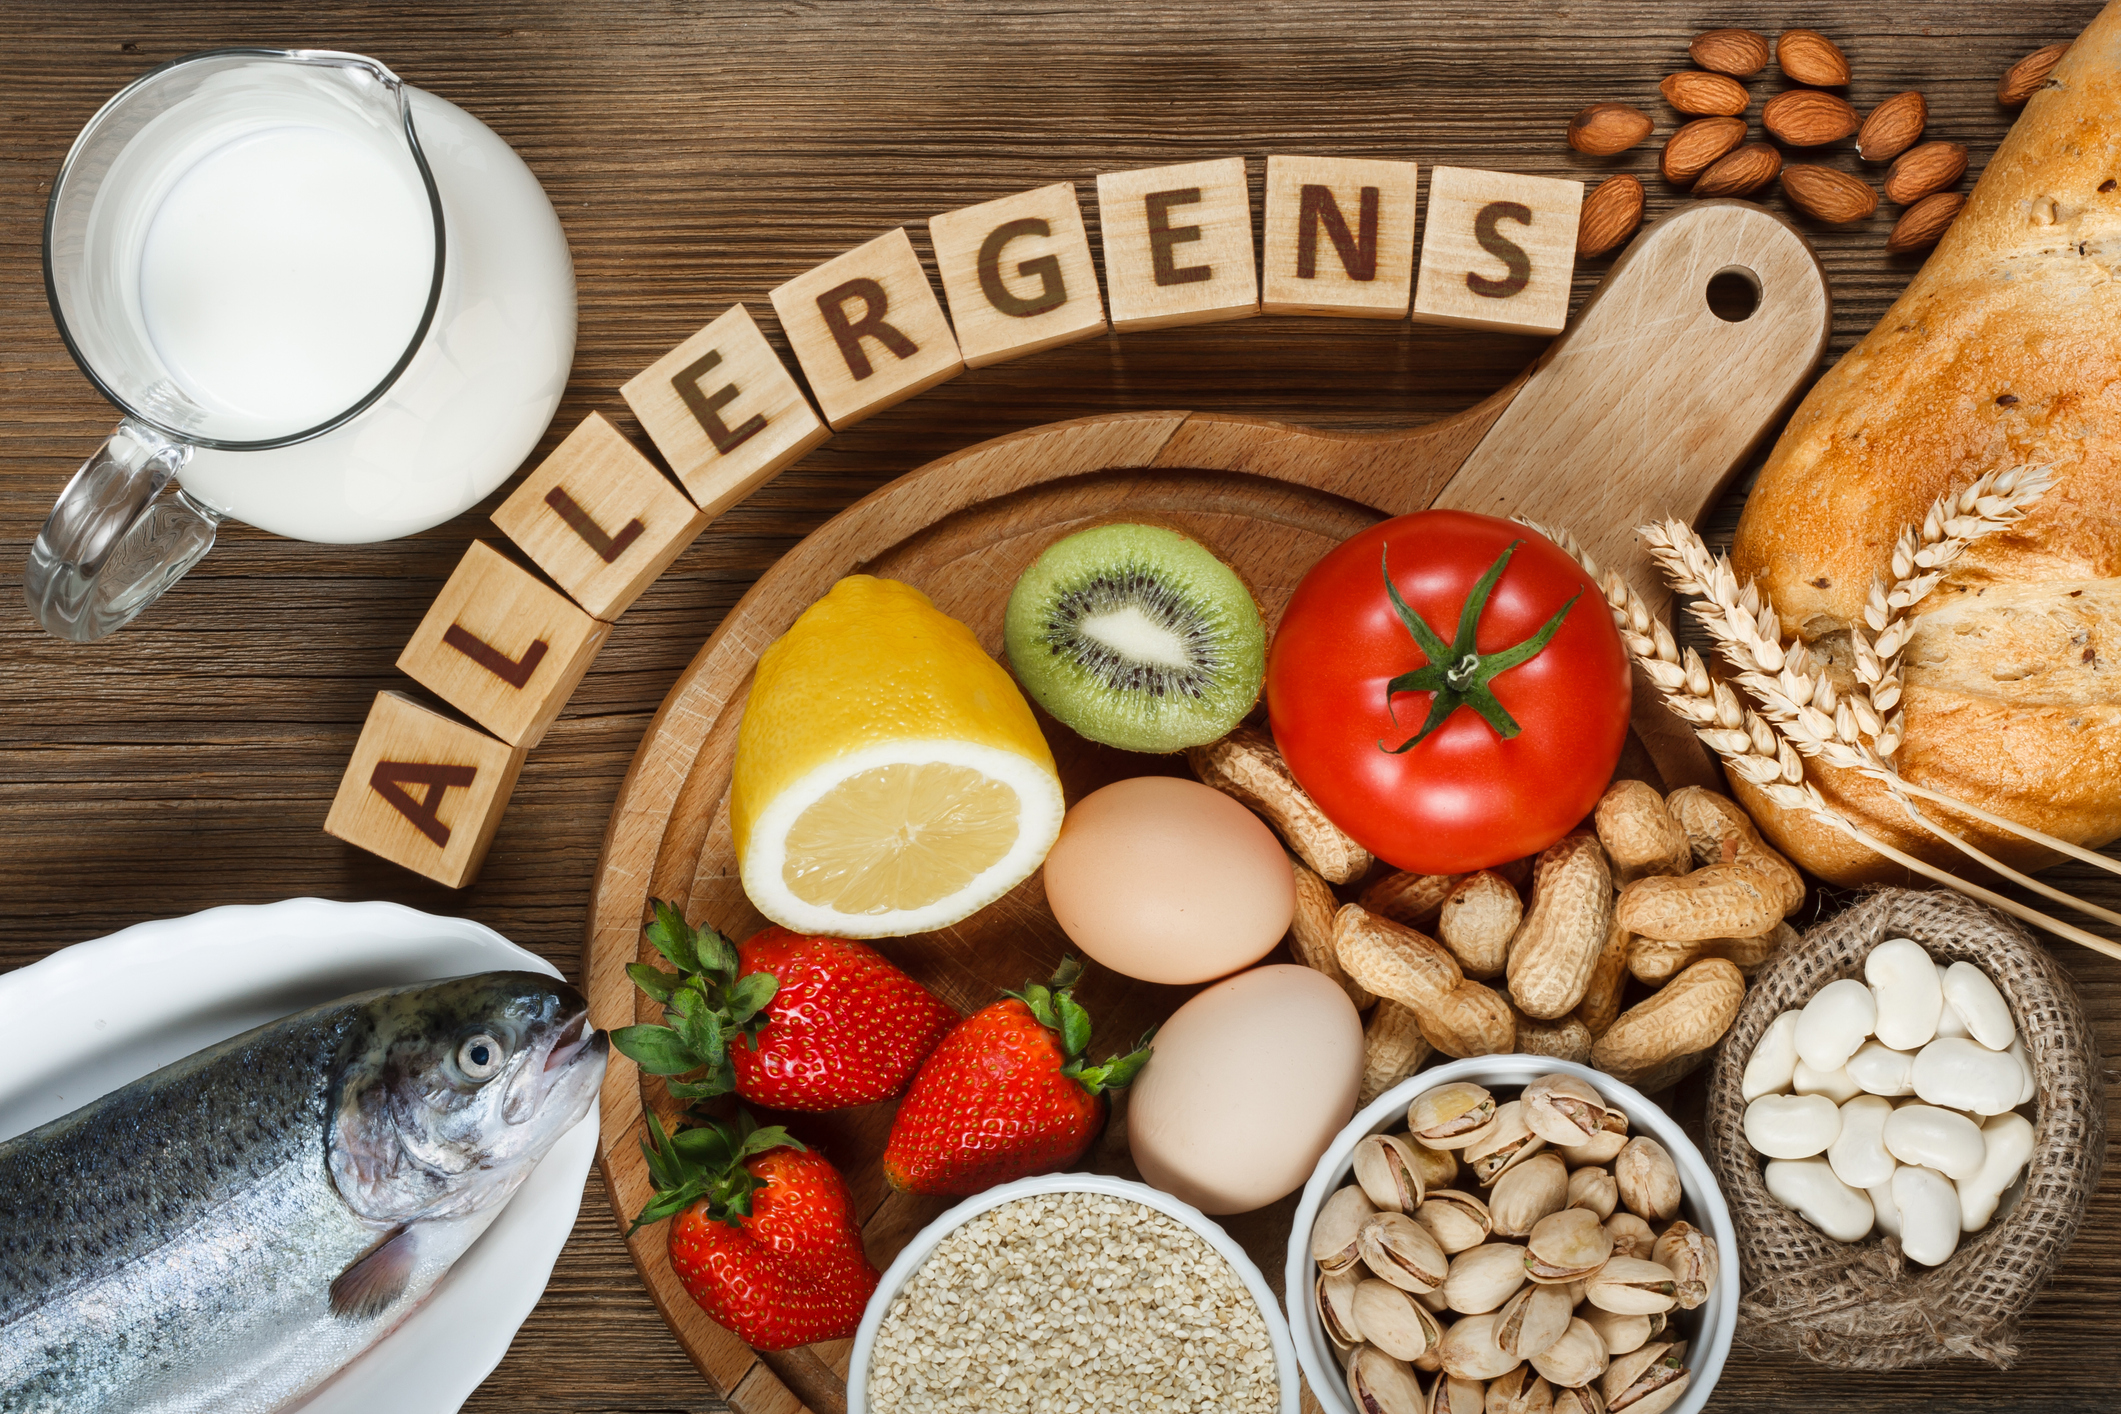 An image of various allergen foods, including peanuts, lima bean, eggs, wheat, milk, and strawberries with a sign that reads allergens.